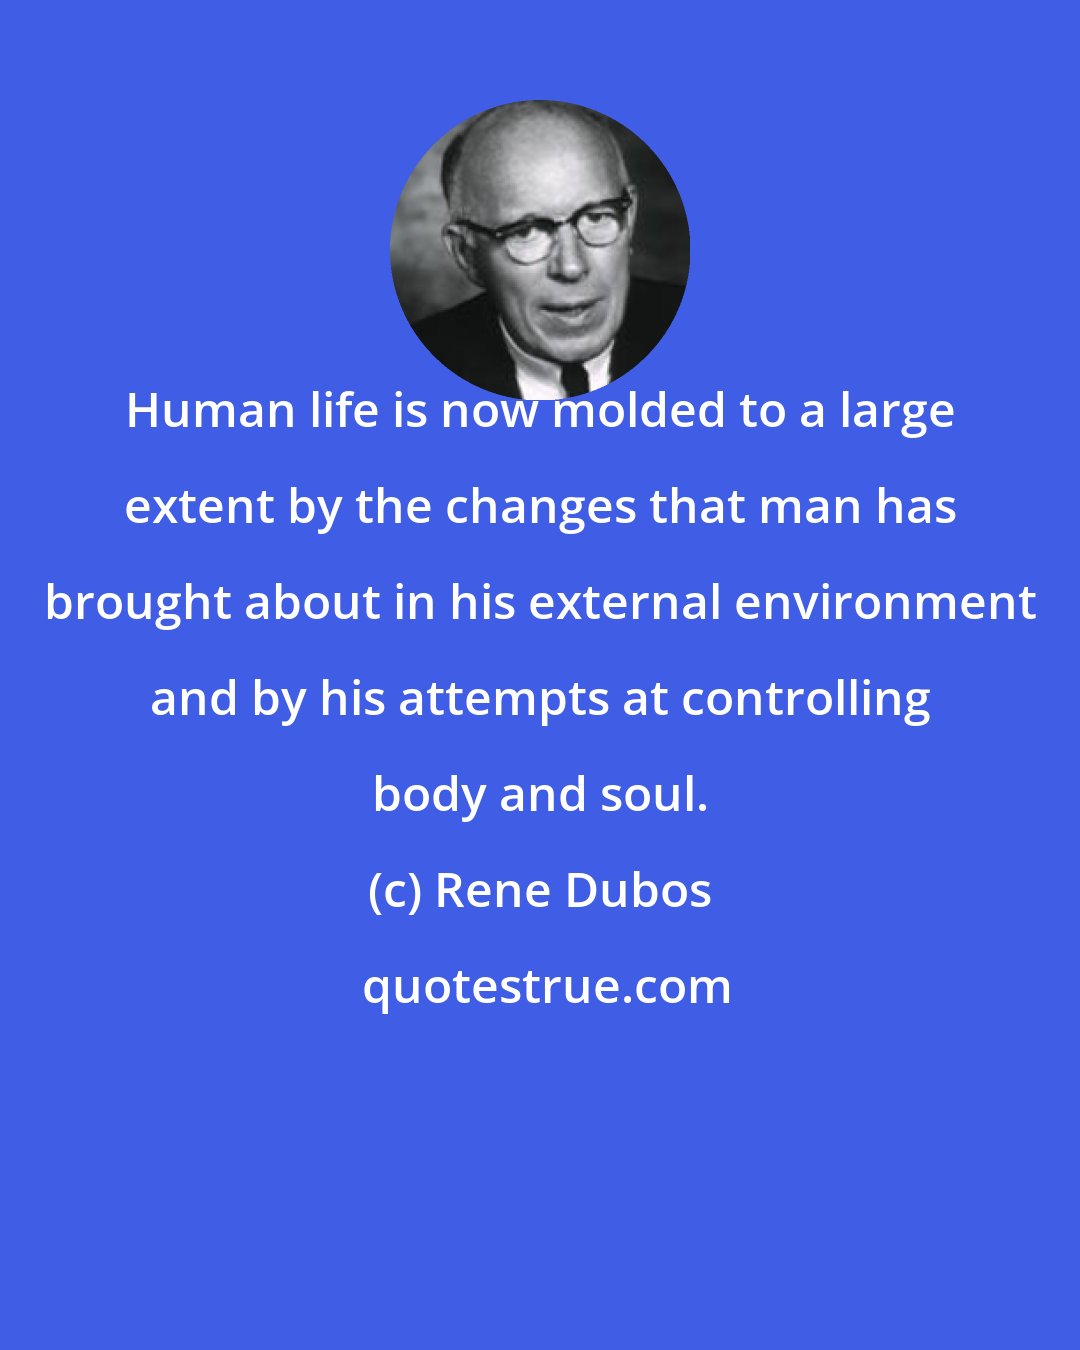 Rene Dubos: Human life is now molded to a large extent by the changes that man has brought about in his external environment and by his attempts at controlling body and soul.